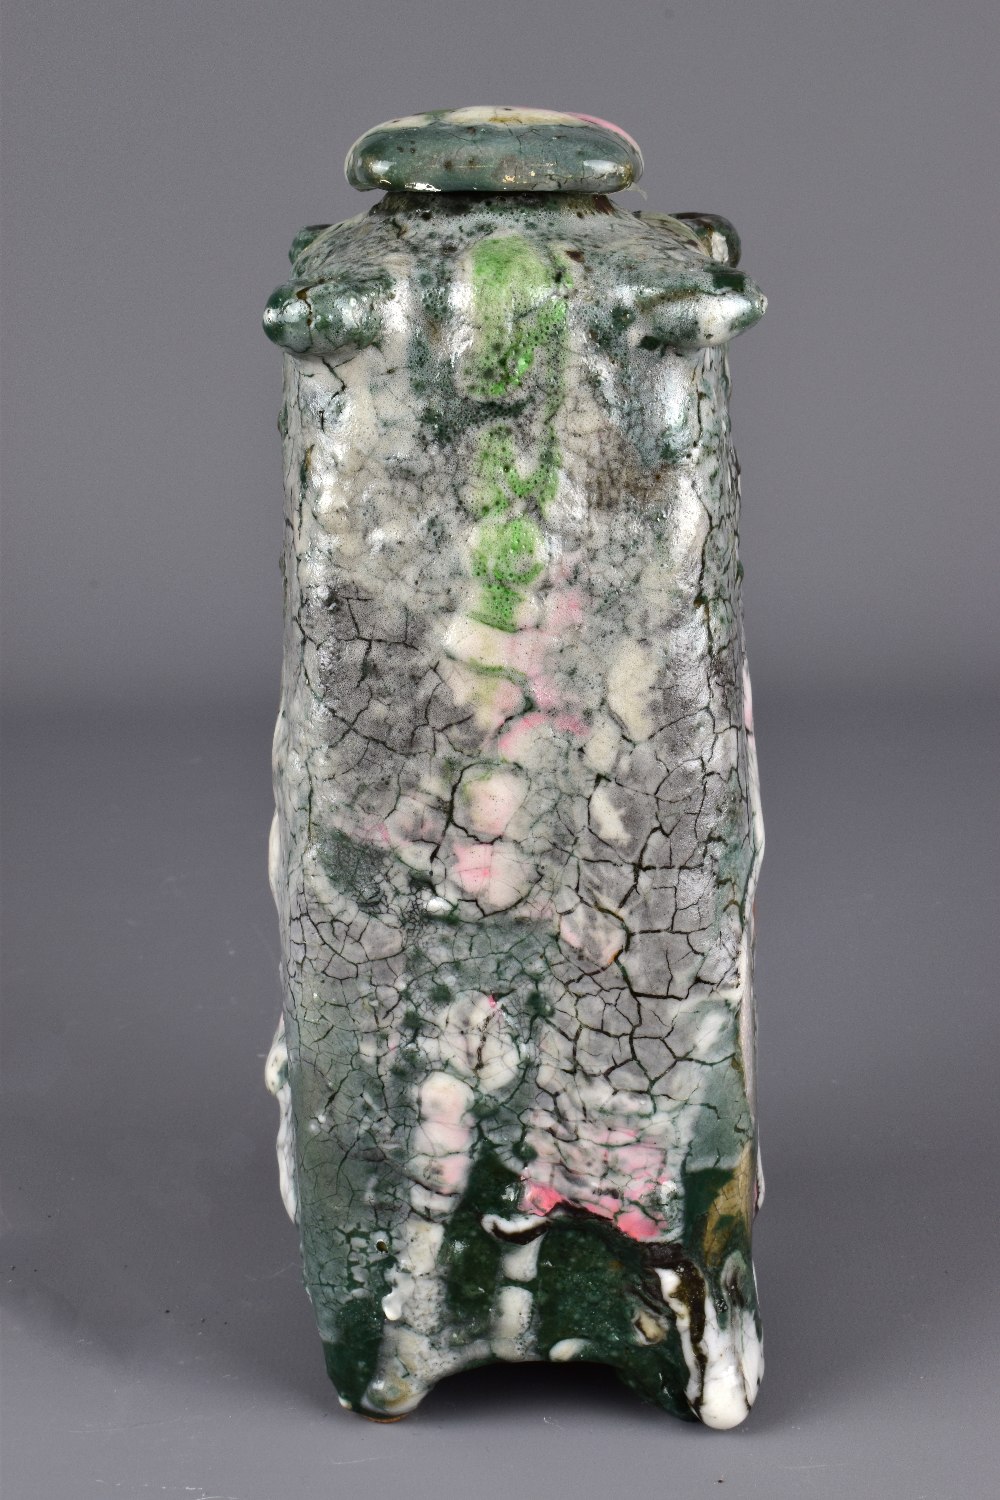 STEPHEN FREEDMAN; a lugged square stoneware jar and cover with abstract decoration, height 23cm.